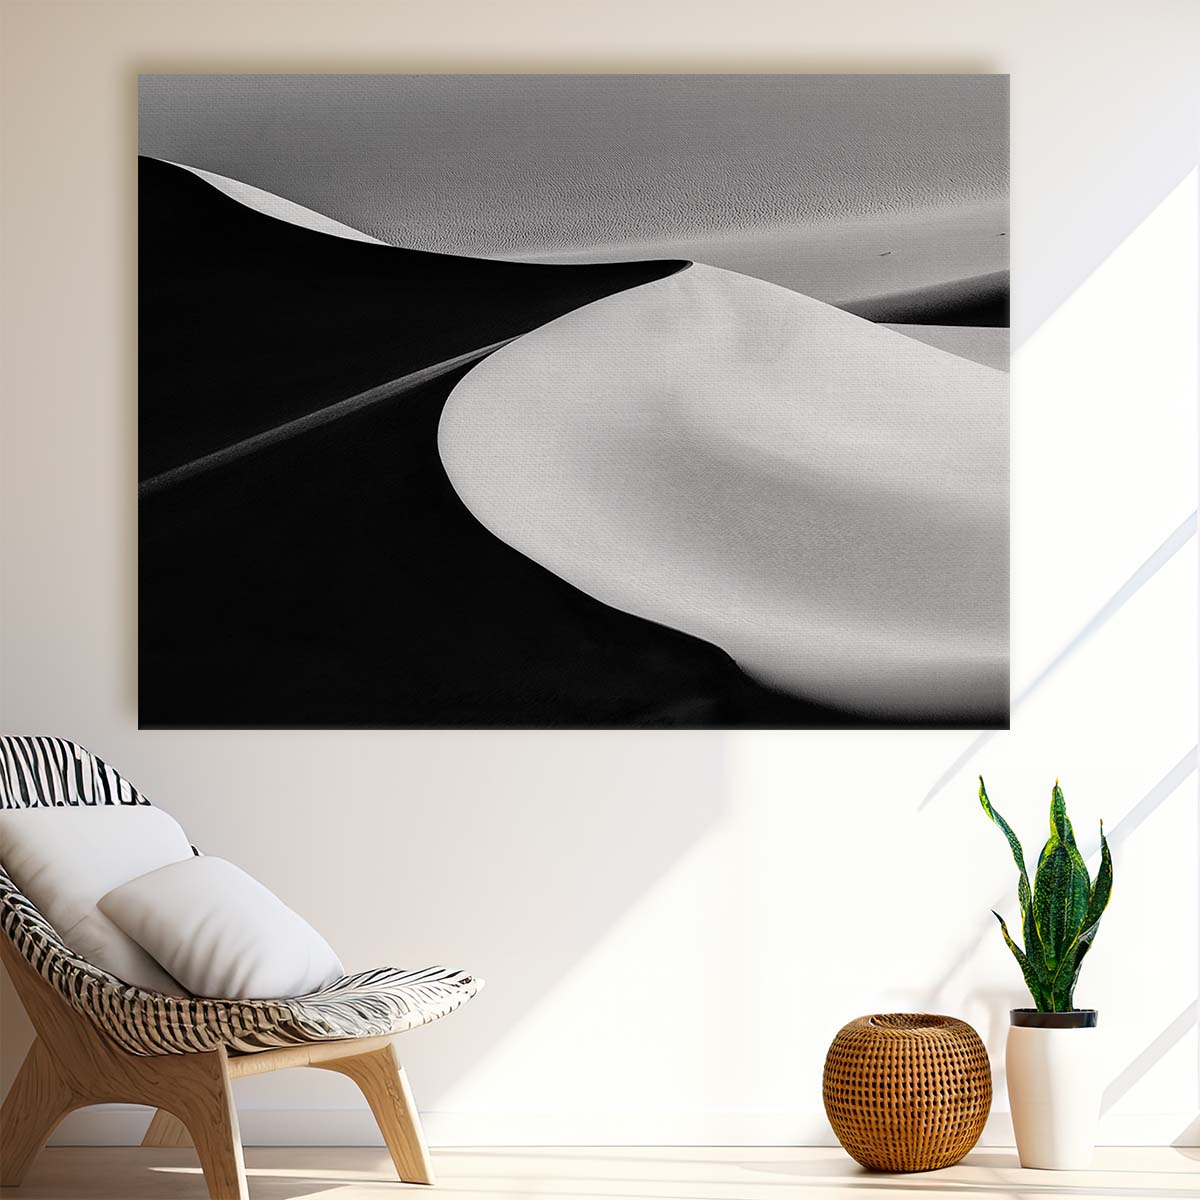 Minimalist Desert Dunes Landscape Abstract Wall Art by Luxuriance Designs. Made in USA.